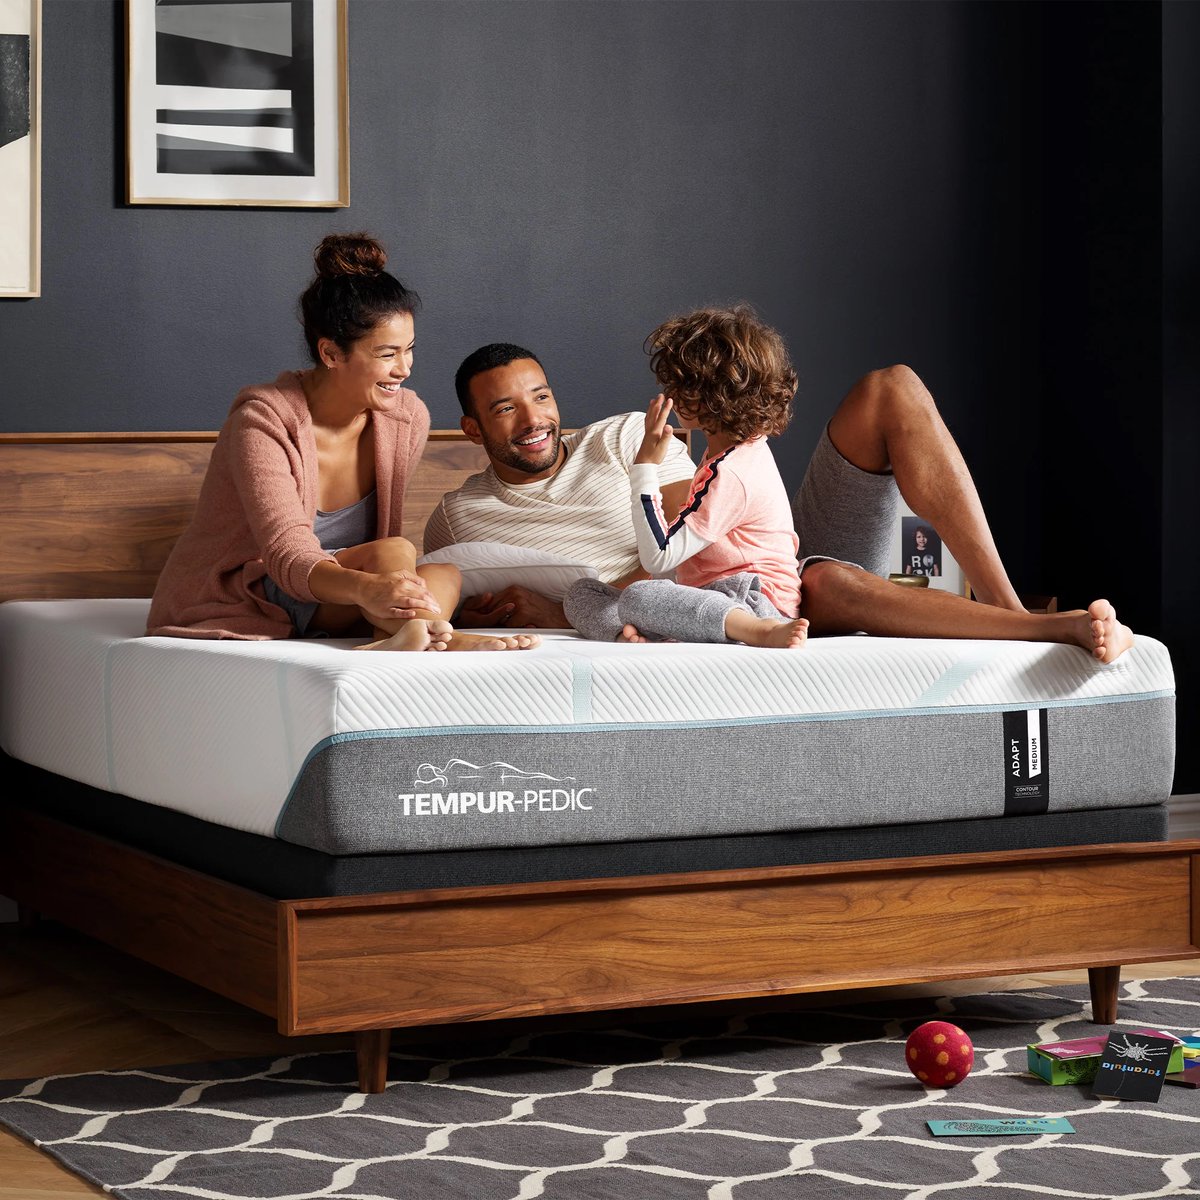 🚨 Save up to 50% on Tempur-Pedic! 🚨 For a limited time, save up to 50% on select floor models of Tempur-Pedic! Get the bed from our showroom to your bedroom! 🛏️ Visit your nearest Bed Store location today! #bedstore #thebedstore #knoxville #tempurpedic #sale